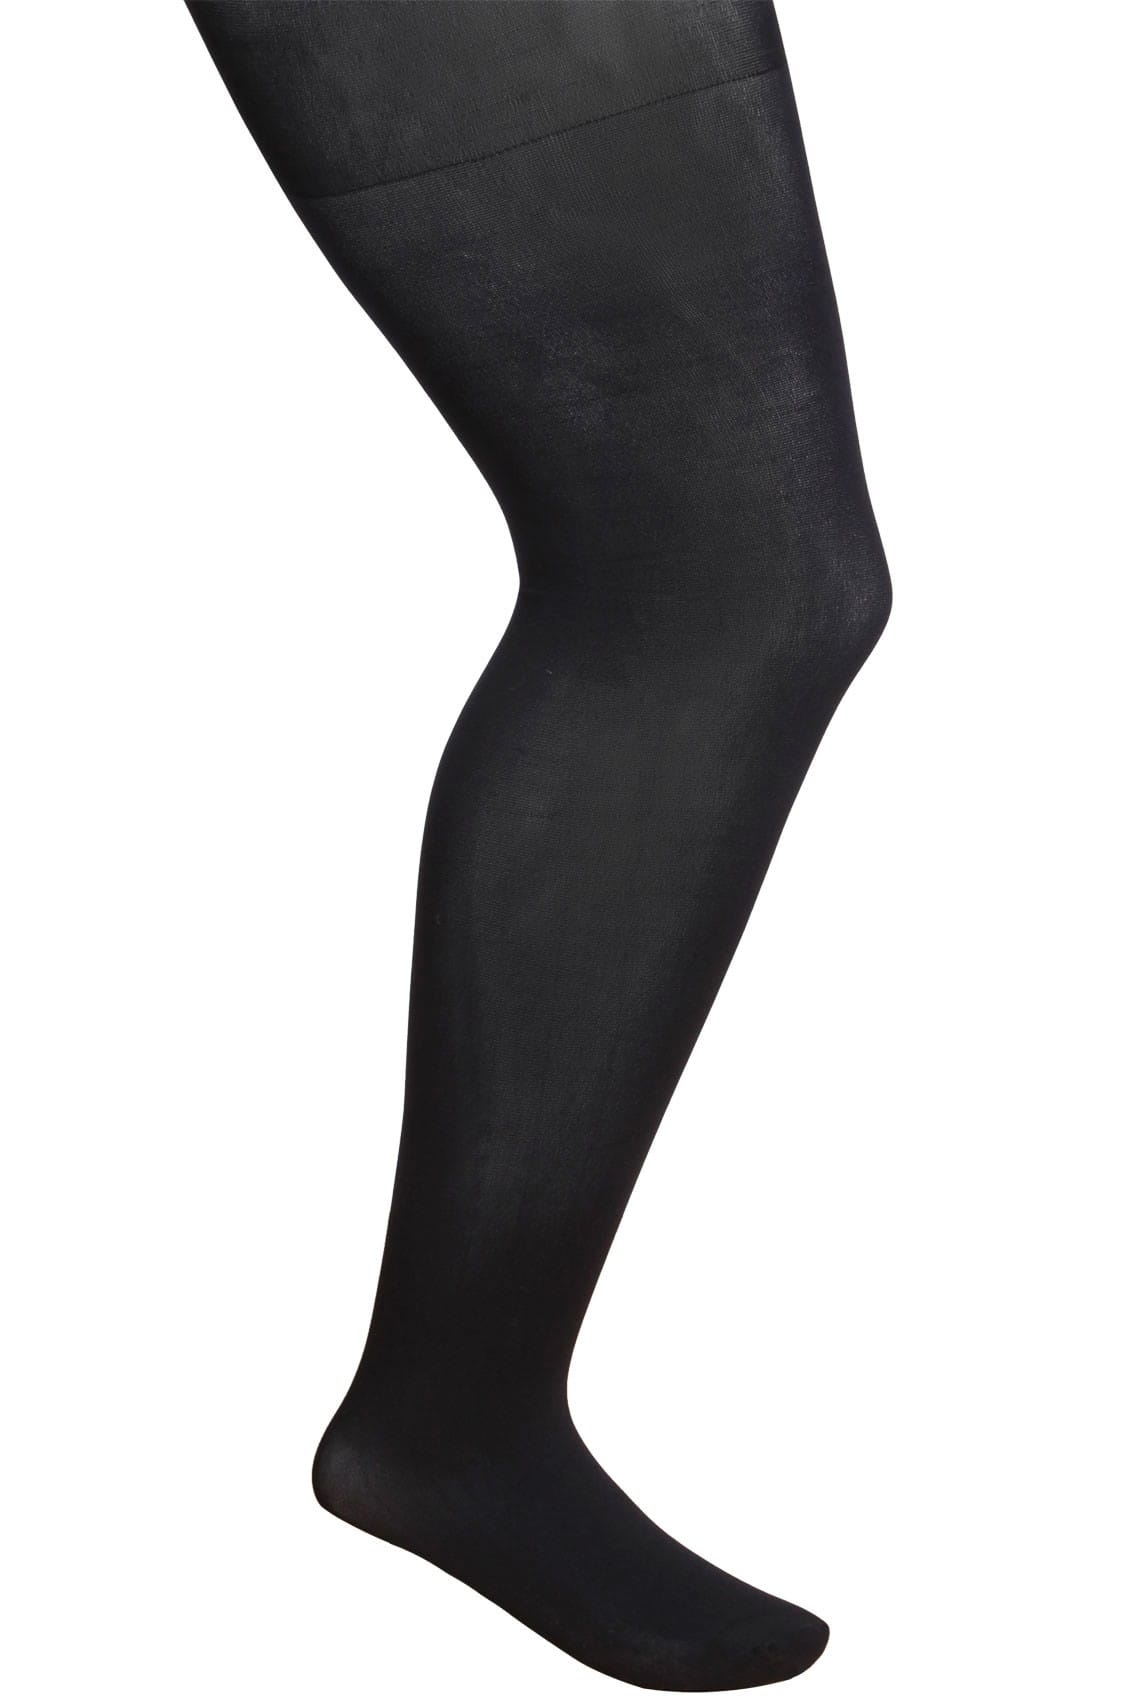 2 PACK Black 100 Denier Tights plus size 16 to 32